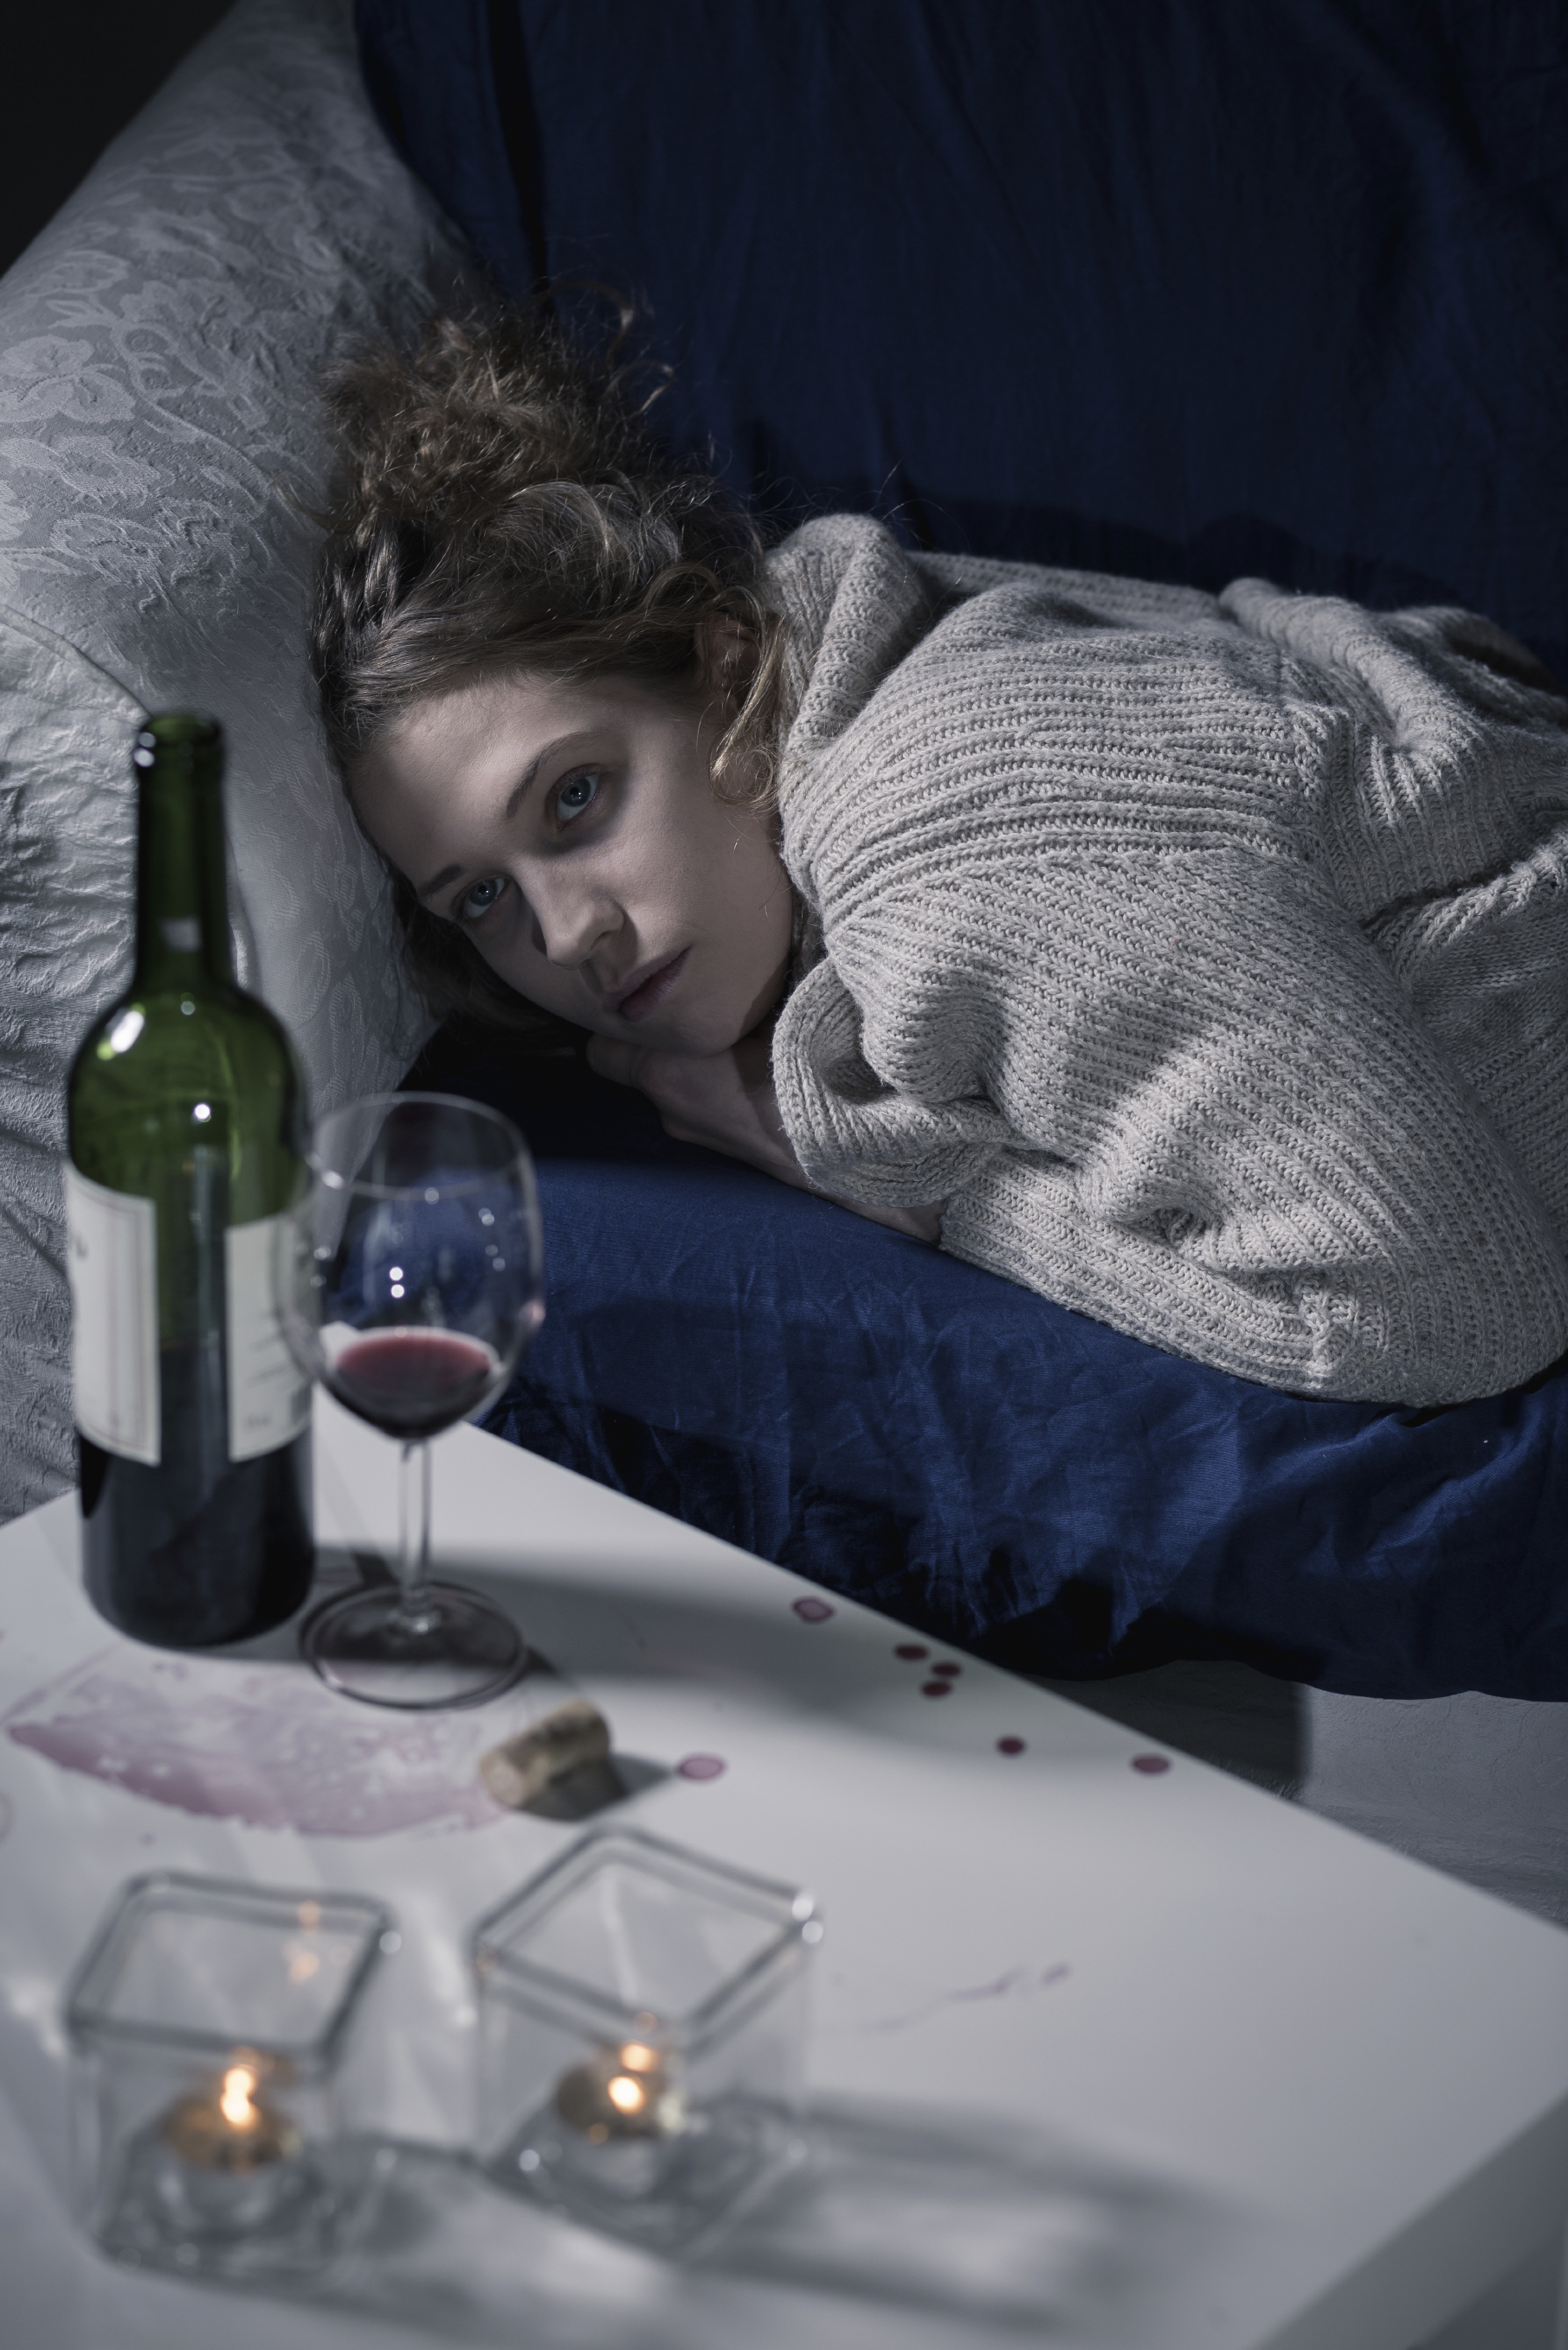 The Connection Between Depression and Alcoholism